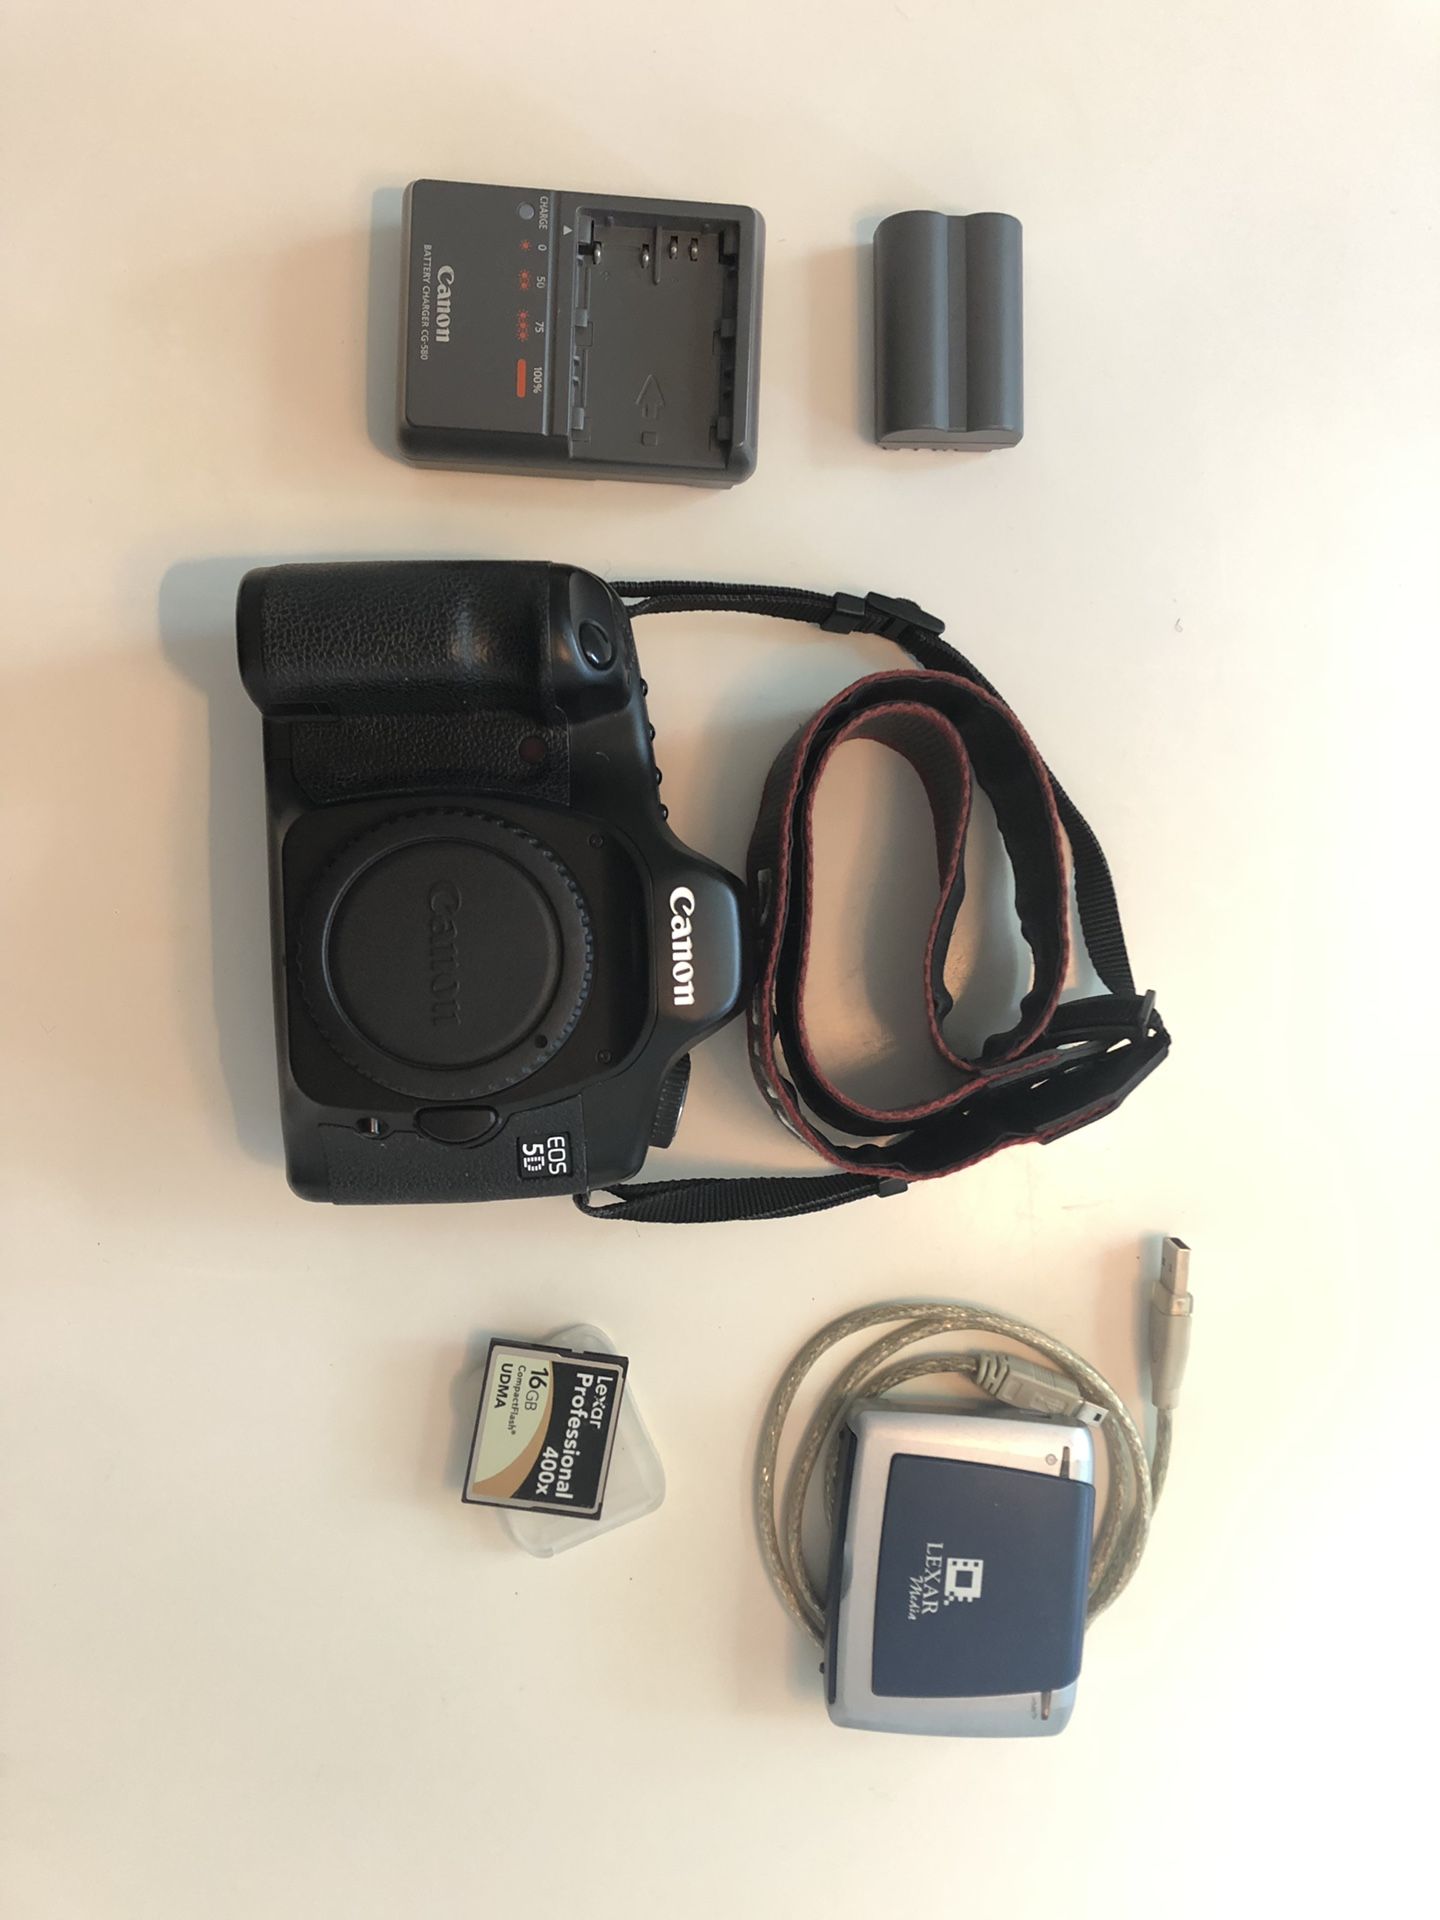 Canon 5D body with CF cards and card reader